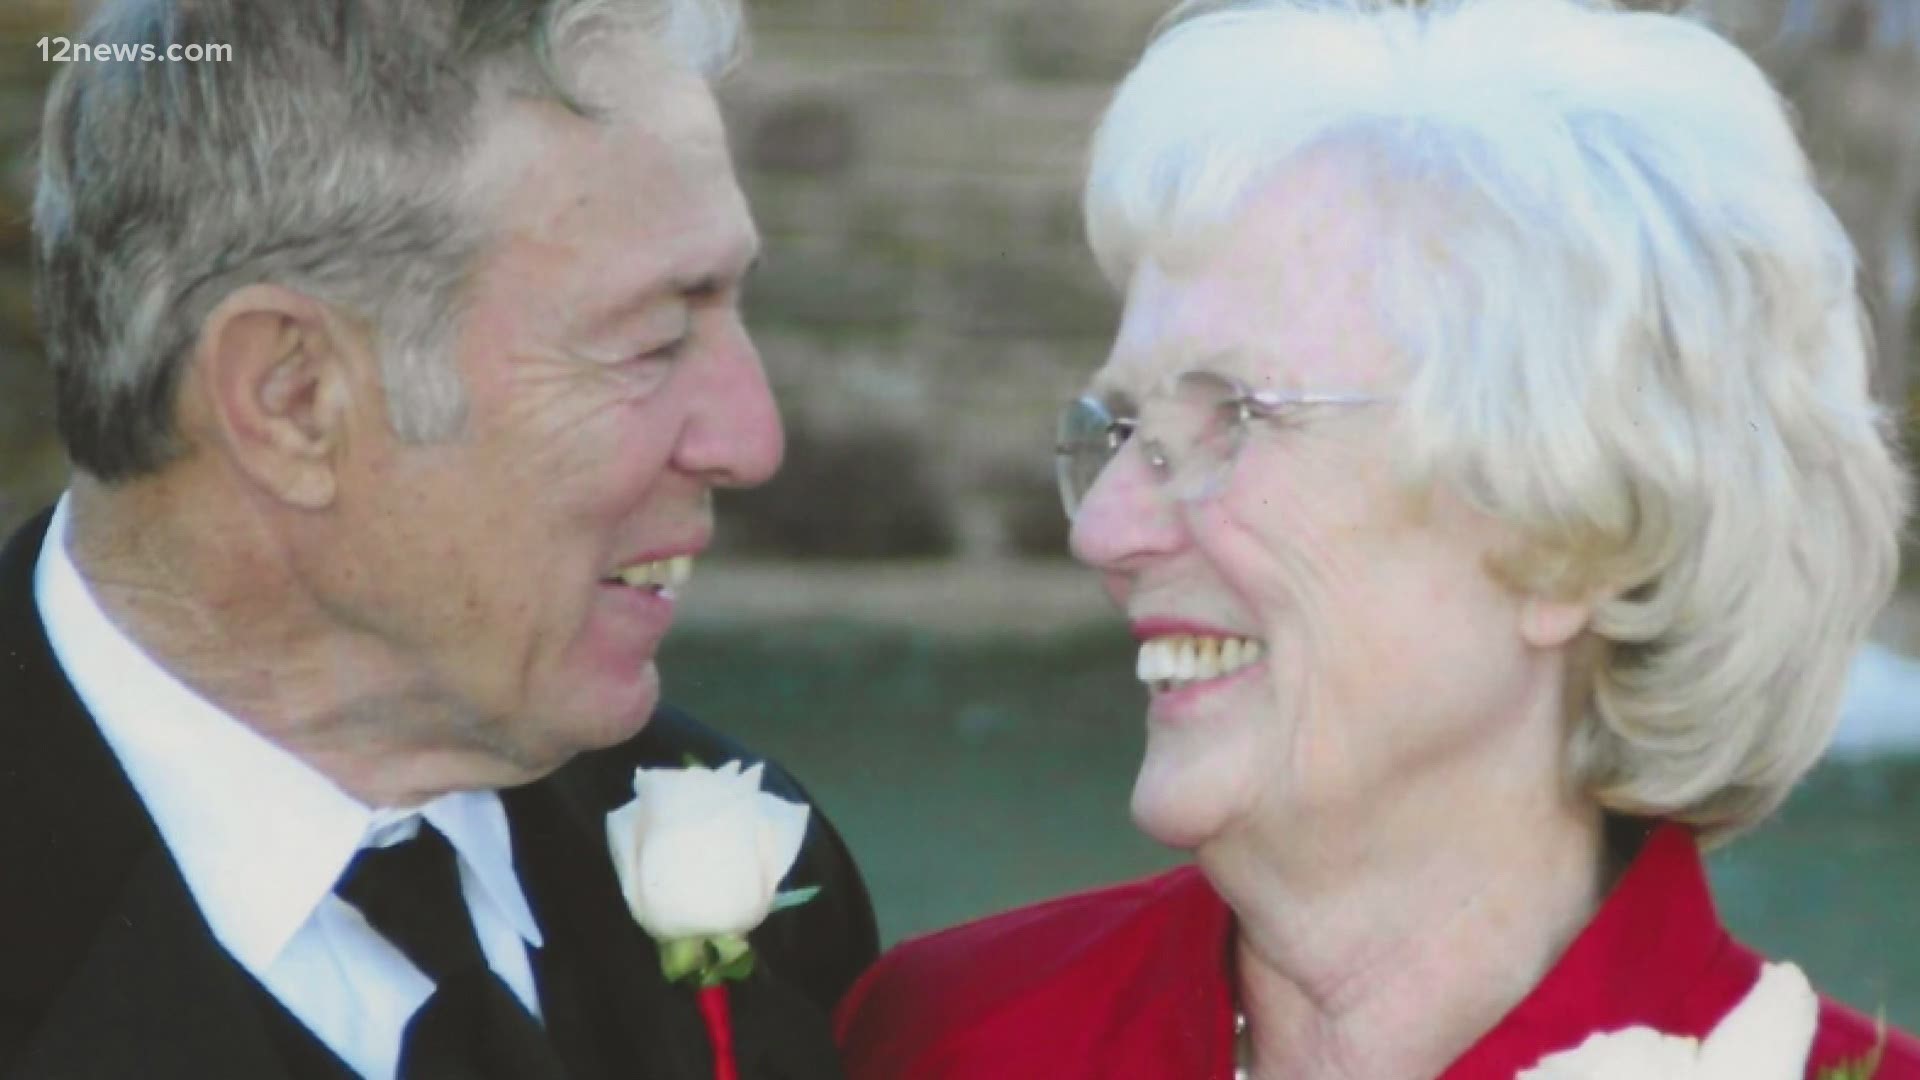 Nancy and Alfred Hodges were married for 64 years and both passed away from COVID-19. Their family knows they will be a missing piece during the holiday season.